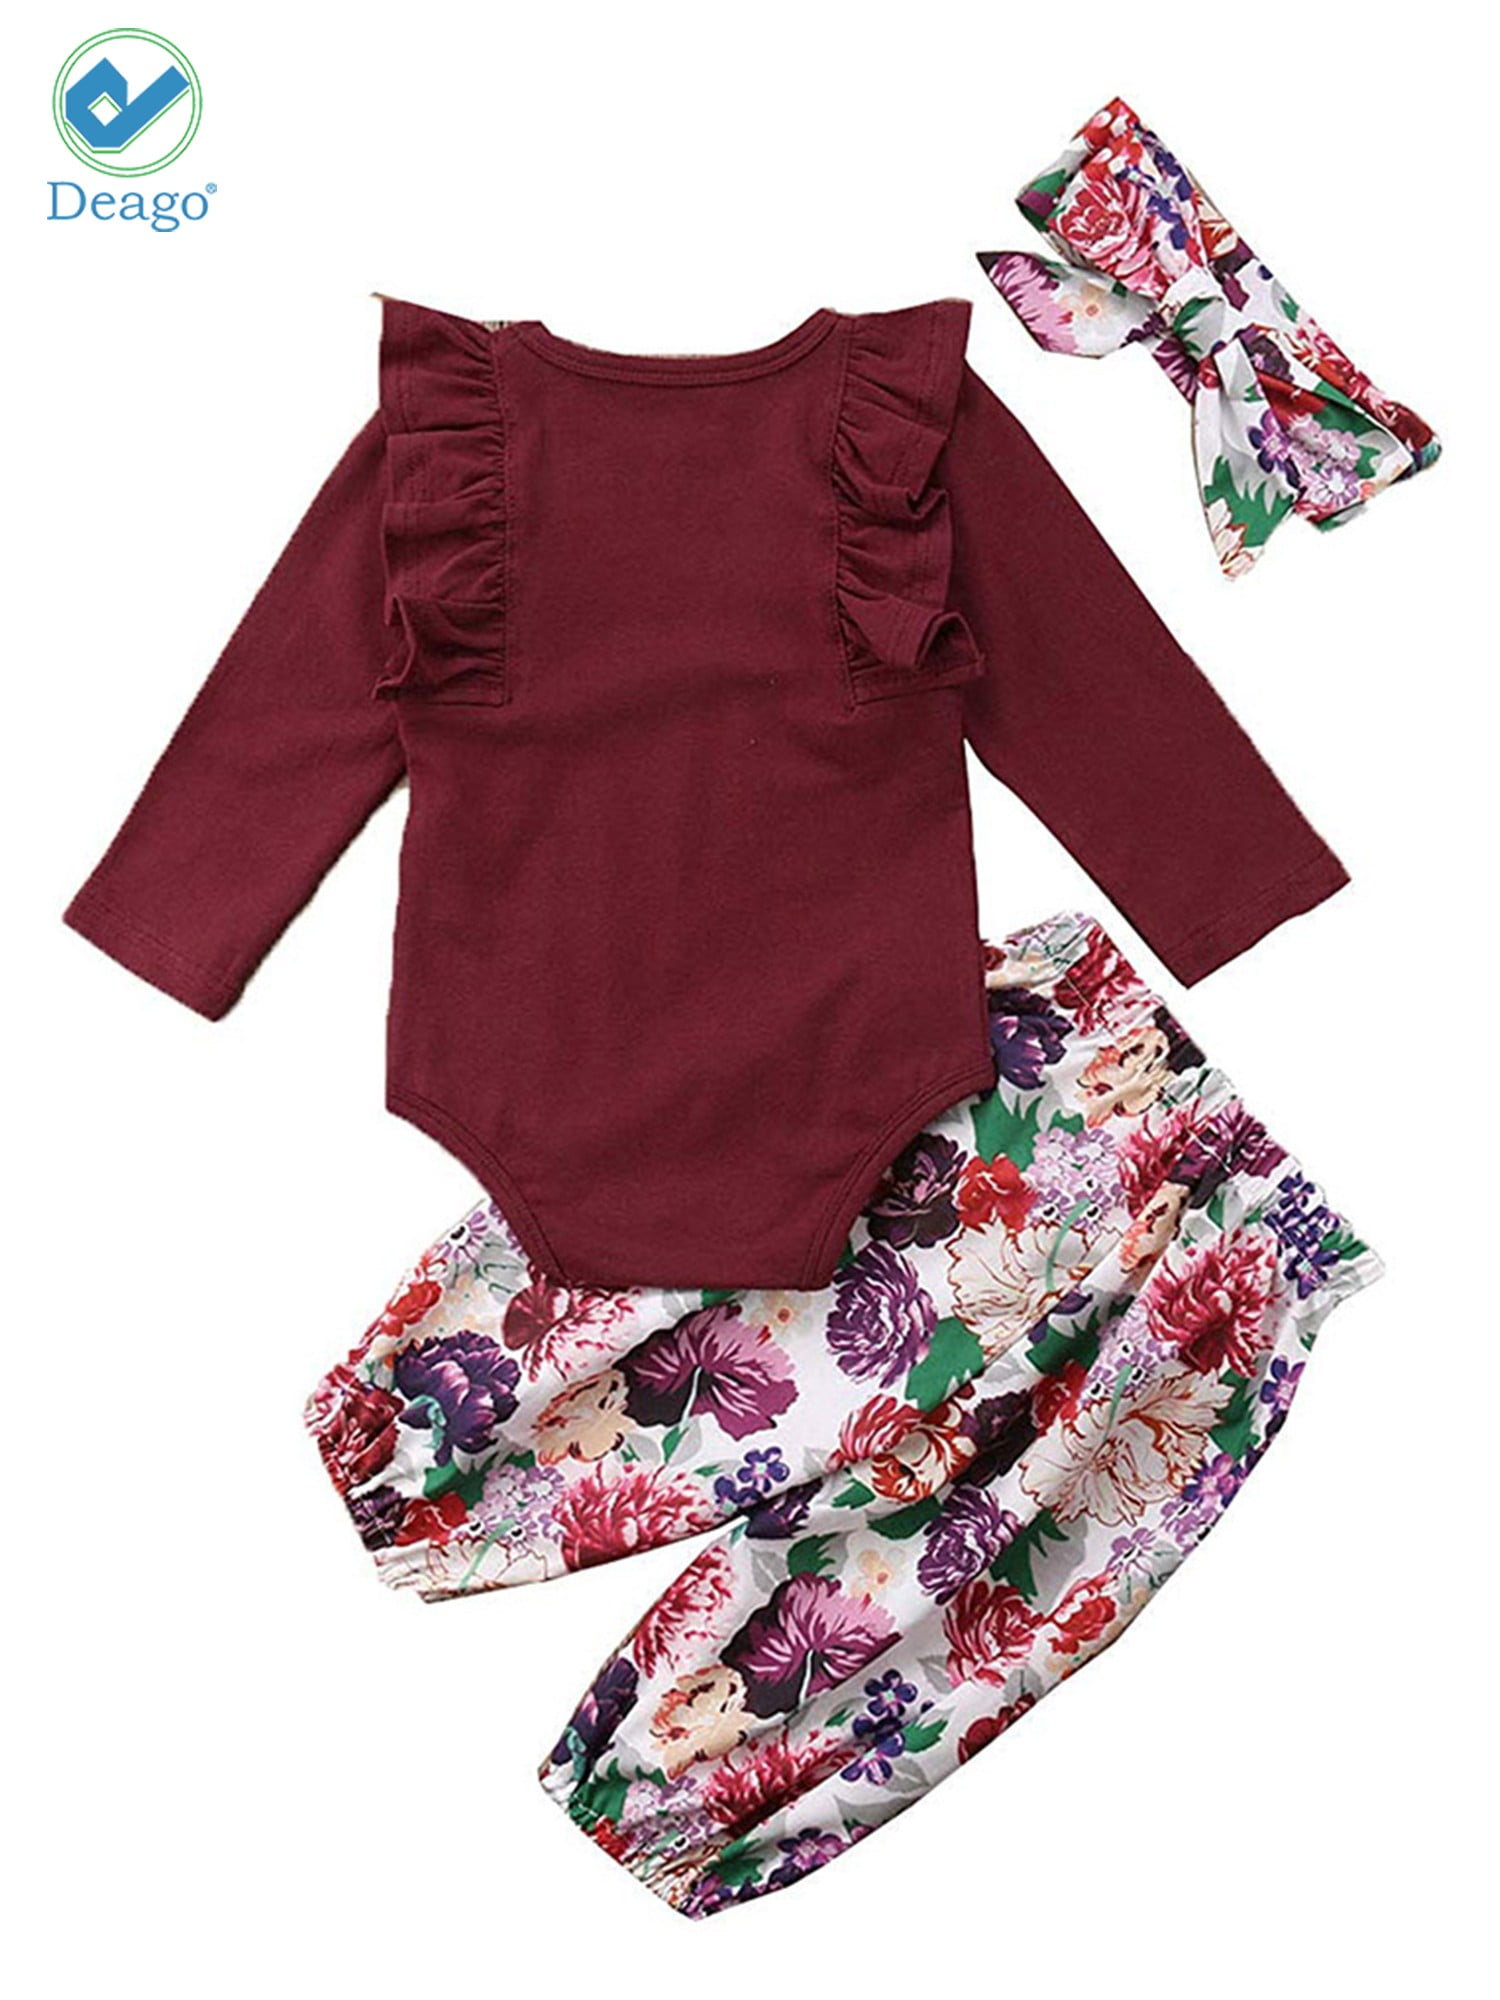 Floral Short Pants Cute Baby Girls’Summer Outfit Set 3pcs（0-24 Months） Newborn Infant Baby Girl Clothes Romper